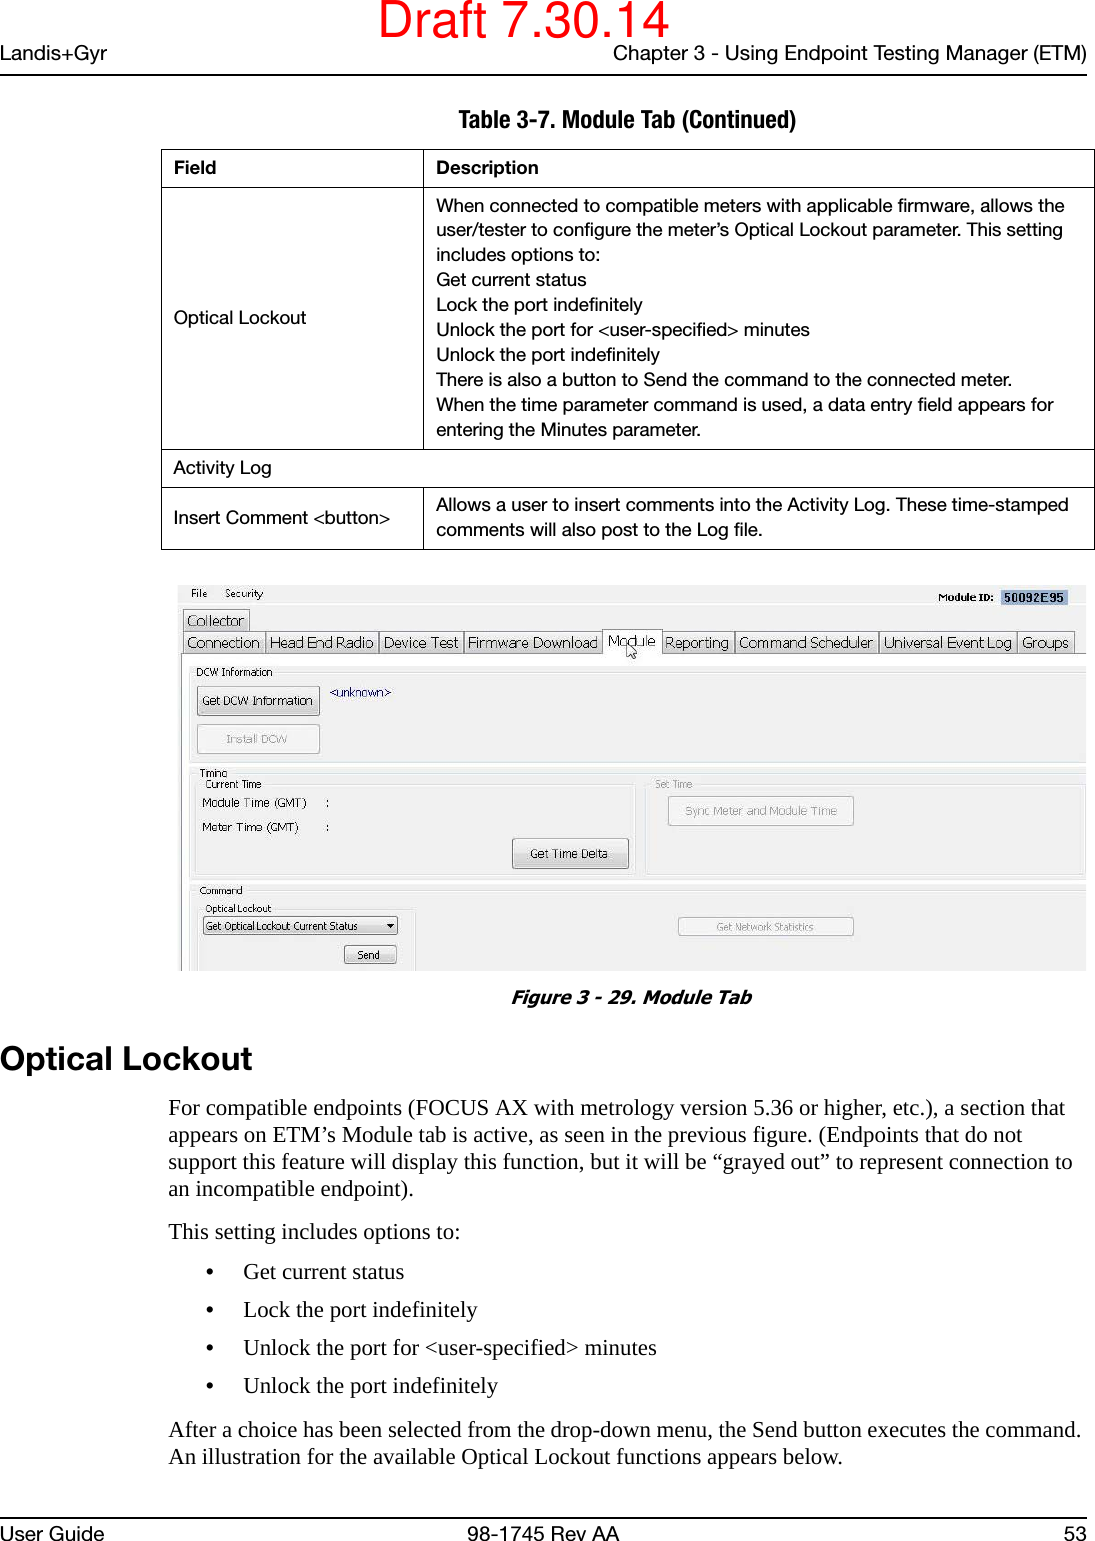 Landis+Gyr Chapter 3 - Using Endpoint Testing Manager (ETM)User Guide 98-1745 Rev AA 53 Figure 3 - 29. Module TabOptical LockoutFor compatible endpoints (FOCUS AX with metrology version 5.36 or higher, etc.), a section that appears on ETM’s Module tab is active, as seen in the previous figure. (Endpoints that do not support this feature will display this function, but it will be “grayed out” to represent connection to an incompatible endpoint).This setting includes options to:•Get current status•Lock the port indefinitely•Unlock the port for &lt;user-specified&gt; minutes•Unlock the port indefinitelyAfter a choice has been selected from the drop-down menu, the Send button executes the command. An illustration for the available Optical Lockout functions appears below.Optical LockoutWhen connected to compatible meters with applicable firmware, allows the user/tester to configure the meter’s Optical Lockout parameter. This setting includes options to:Get current statusLock the port indefinitelyUnlock the port for &lt;user-specified&gt; minutesUnlock the port indefinitelyThere is also a button to Send the command to the connected meter. When the time parameter command is used, a data entry field appears for entering the Minutes parameter.Activity LogInsert Comment &lt;button&gt; Allows a user to insert comments into the Activity Log. These time-stamped comments will also post to the Log file.Table 3-7. Module Tab (Continued)Field DescriptionDraft 7.30.14